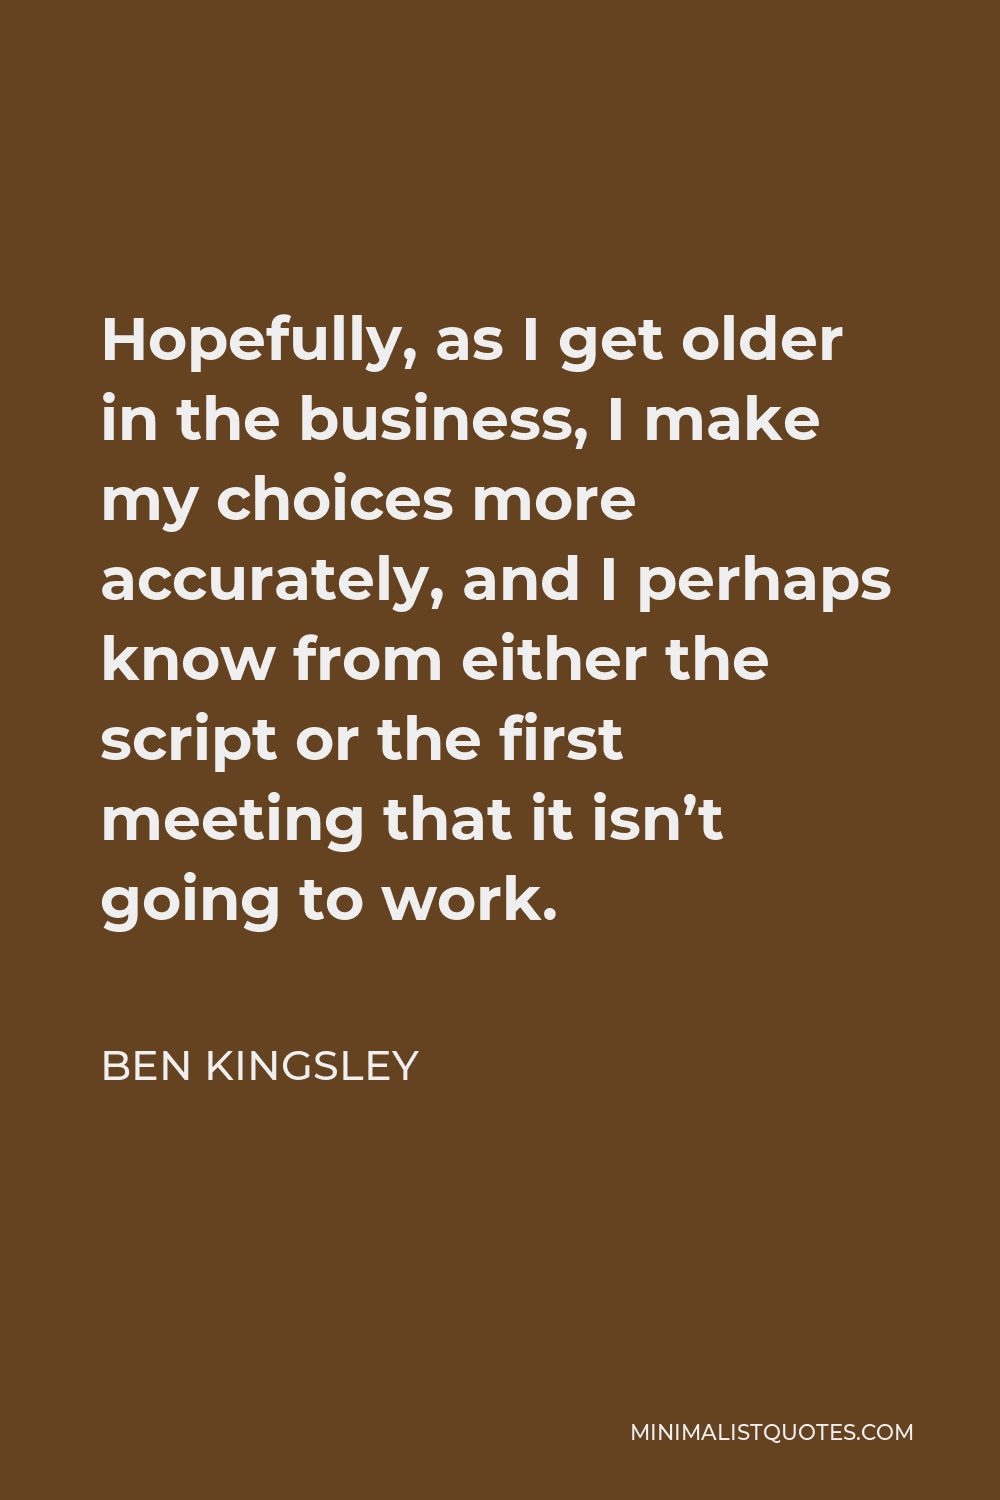 Ben Kingsley Quote - Hopefully, as I get older in the business, I make my choices more accurately, and I perhaps know from either the script or the first meeting that it isn’t going to work.